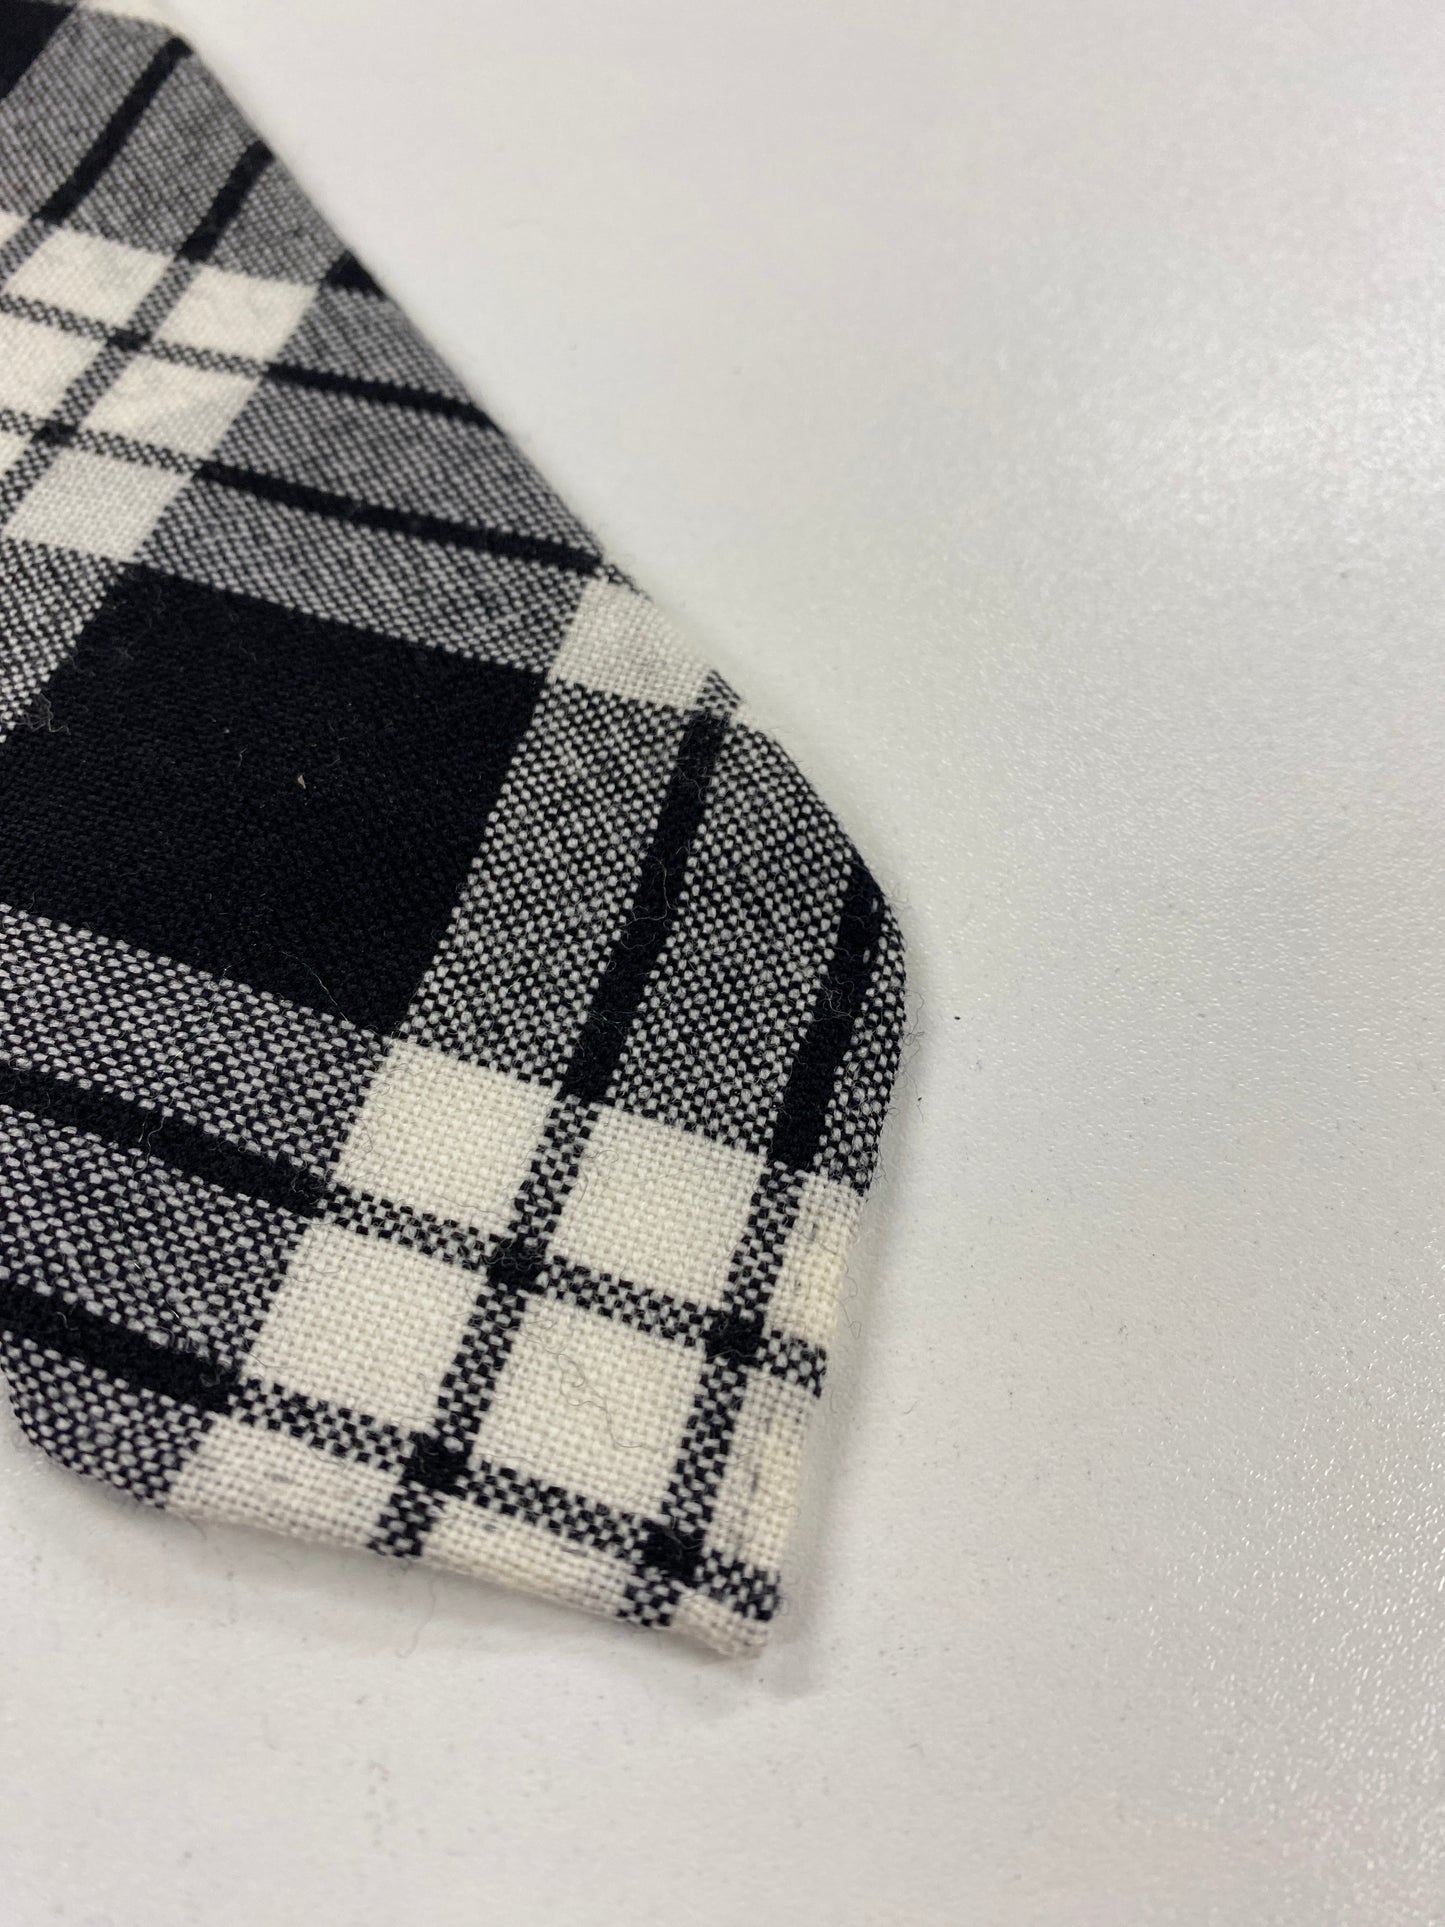 Margaret Howell Black and White Checkered Wool Tie